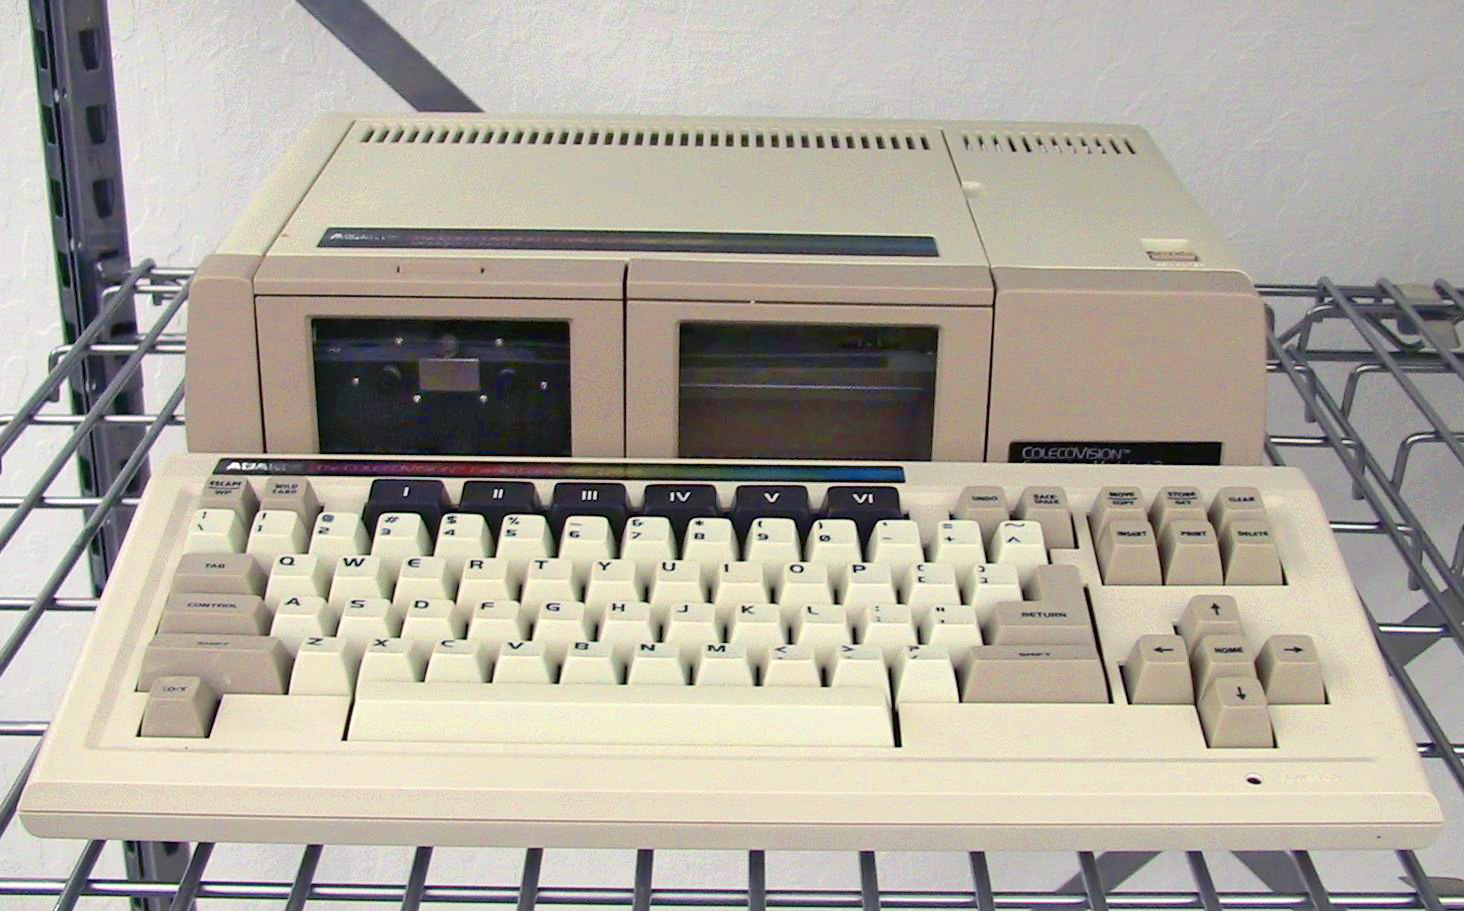 Coleco Adam came with two high-speed cassette drives